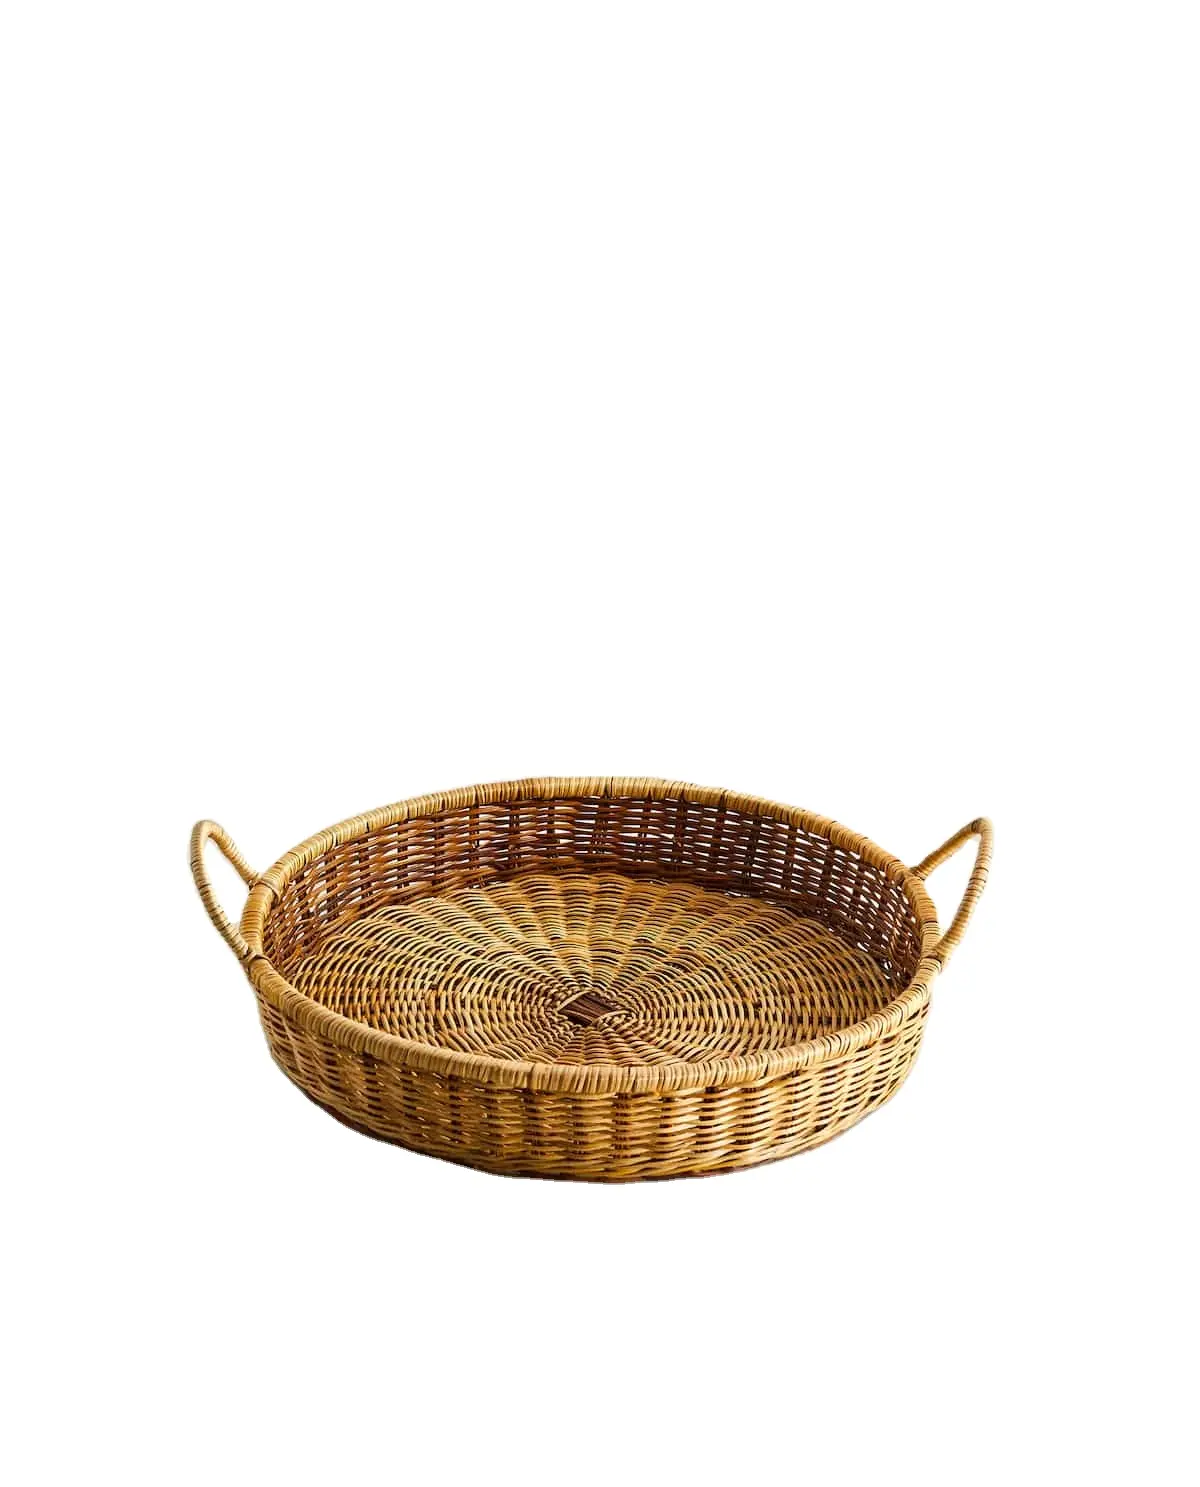 Best selling Amazon rattan oval basket with two side handles storage baskets